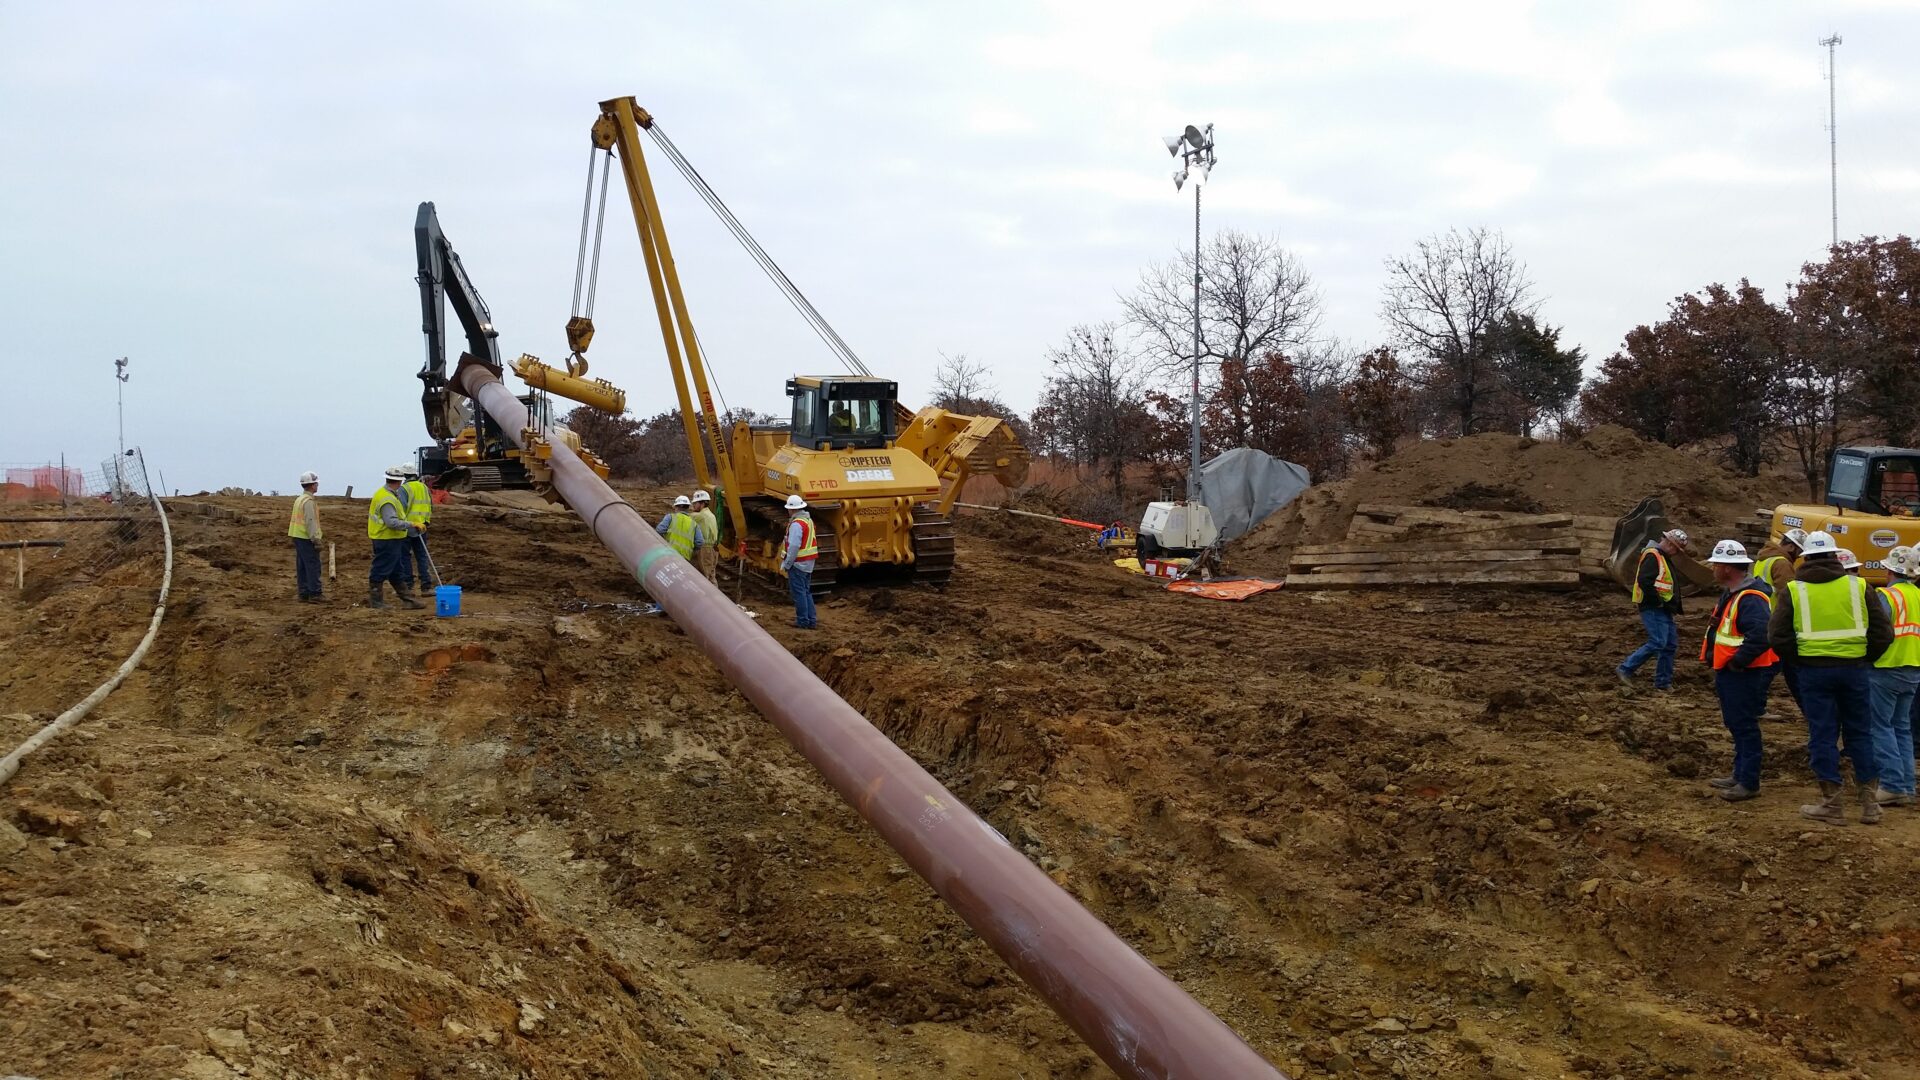 A large pipe laying in the ground next to a crane.